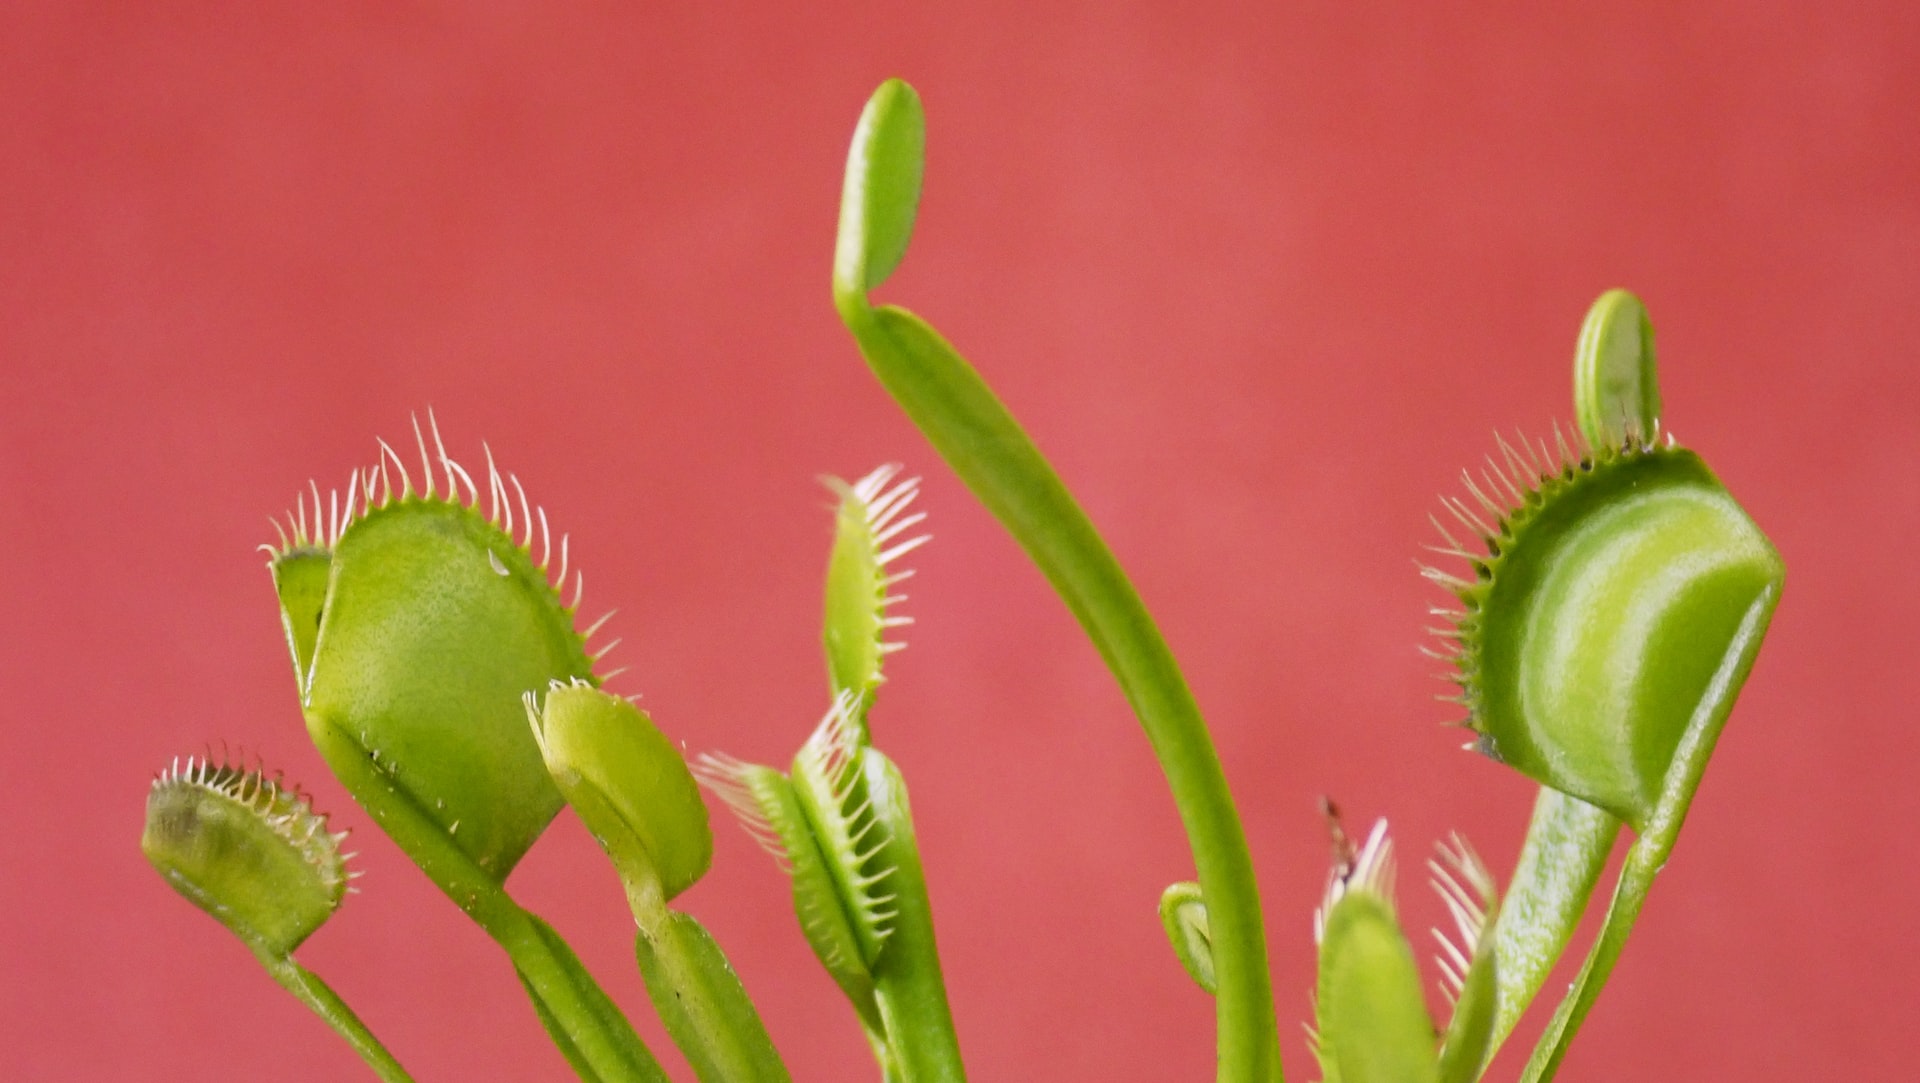 Venus fly trap to demonstrate that customer loyalty programs are deceptive and are a trap business owners fall into thinking they're a good idea